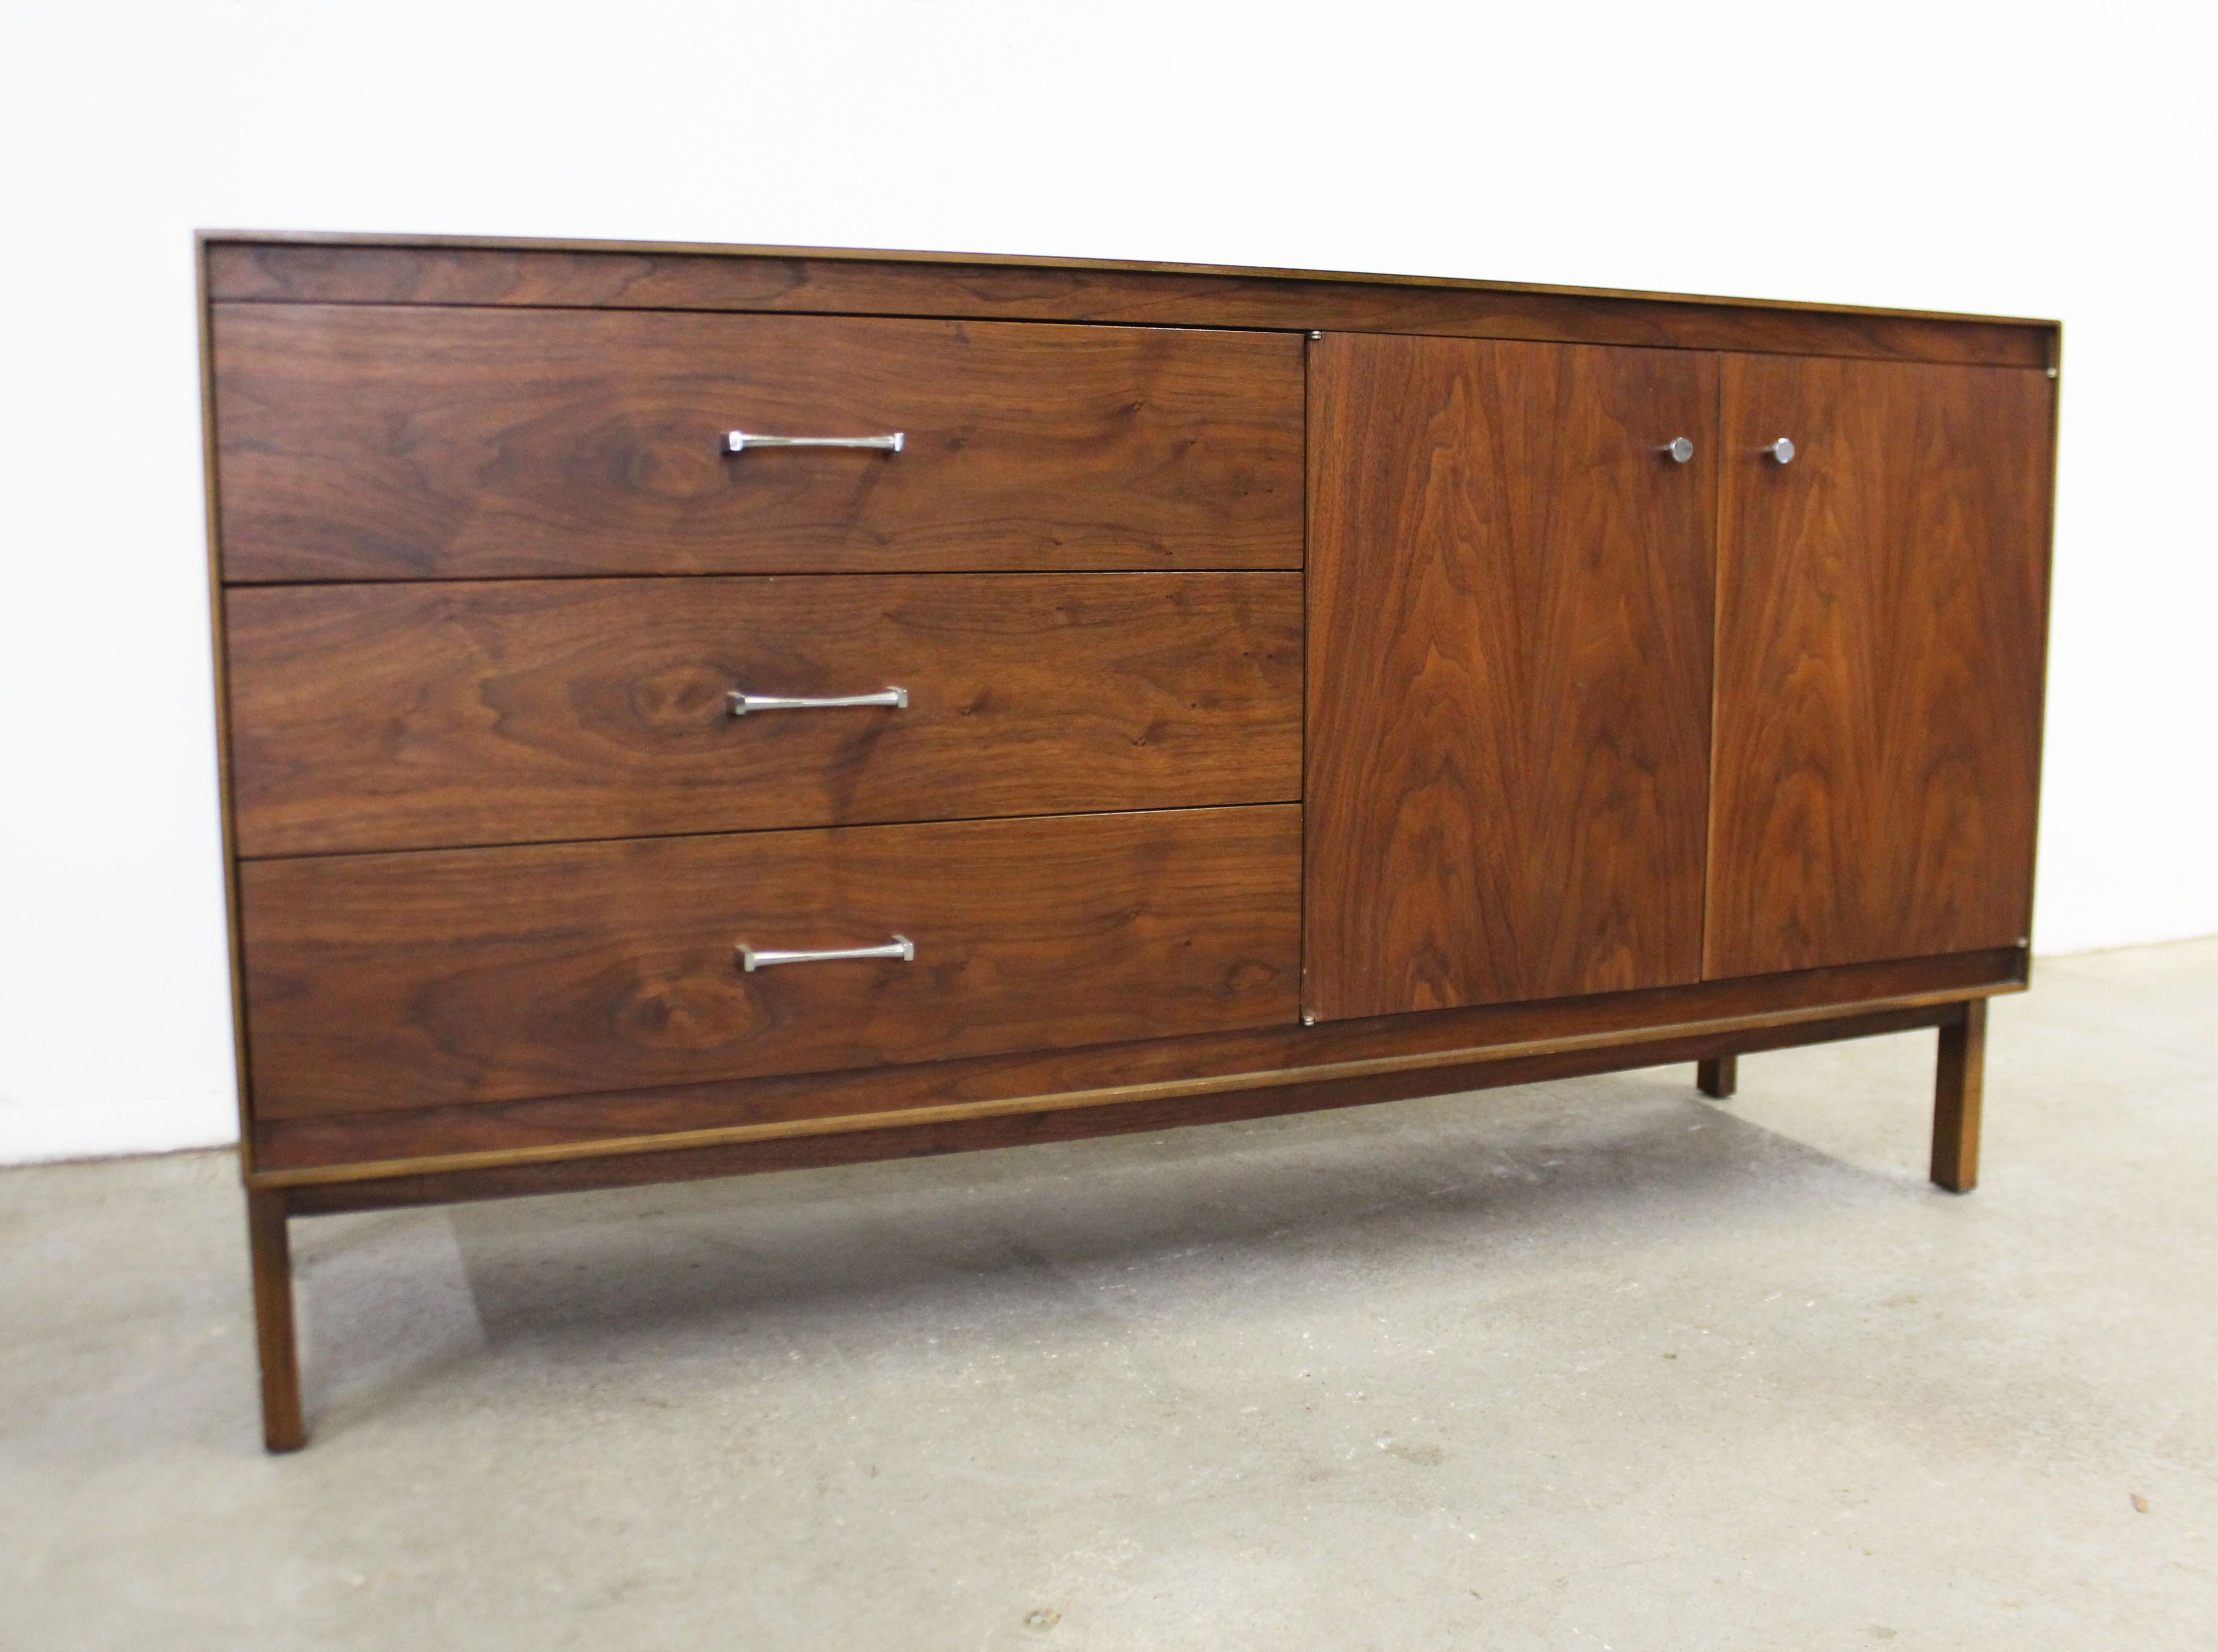 Offered is a vintage Mid-Century Modern credenza, designed by Paul McCobb for Lane's 